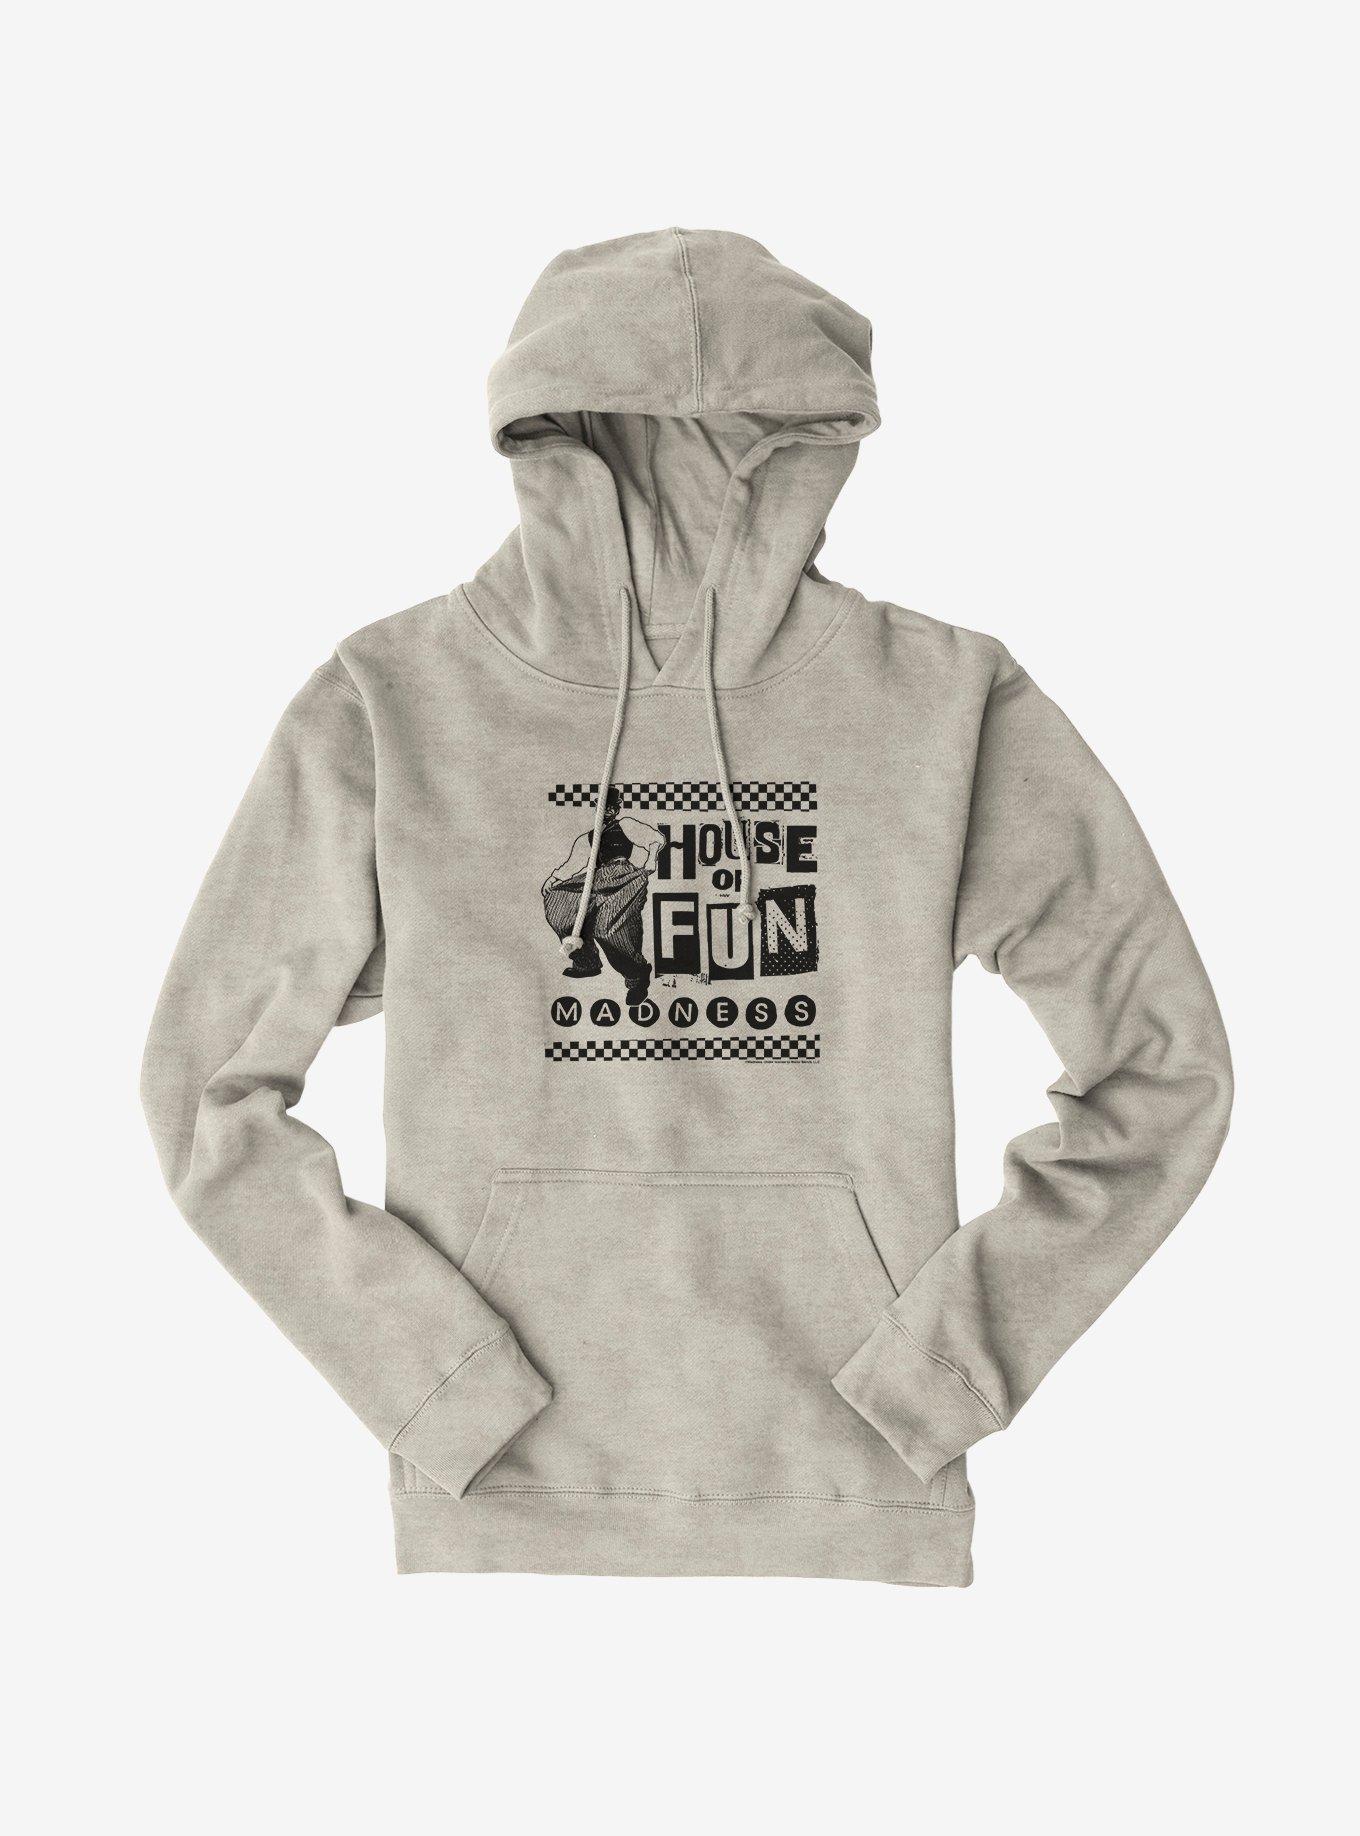 Madness House Of Fun Hoodie, OATMEAL HEATHER, hi-res